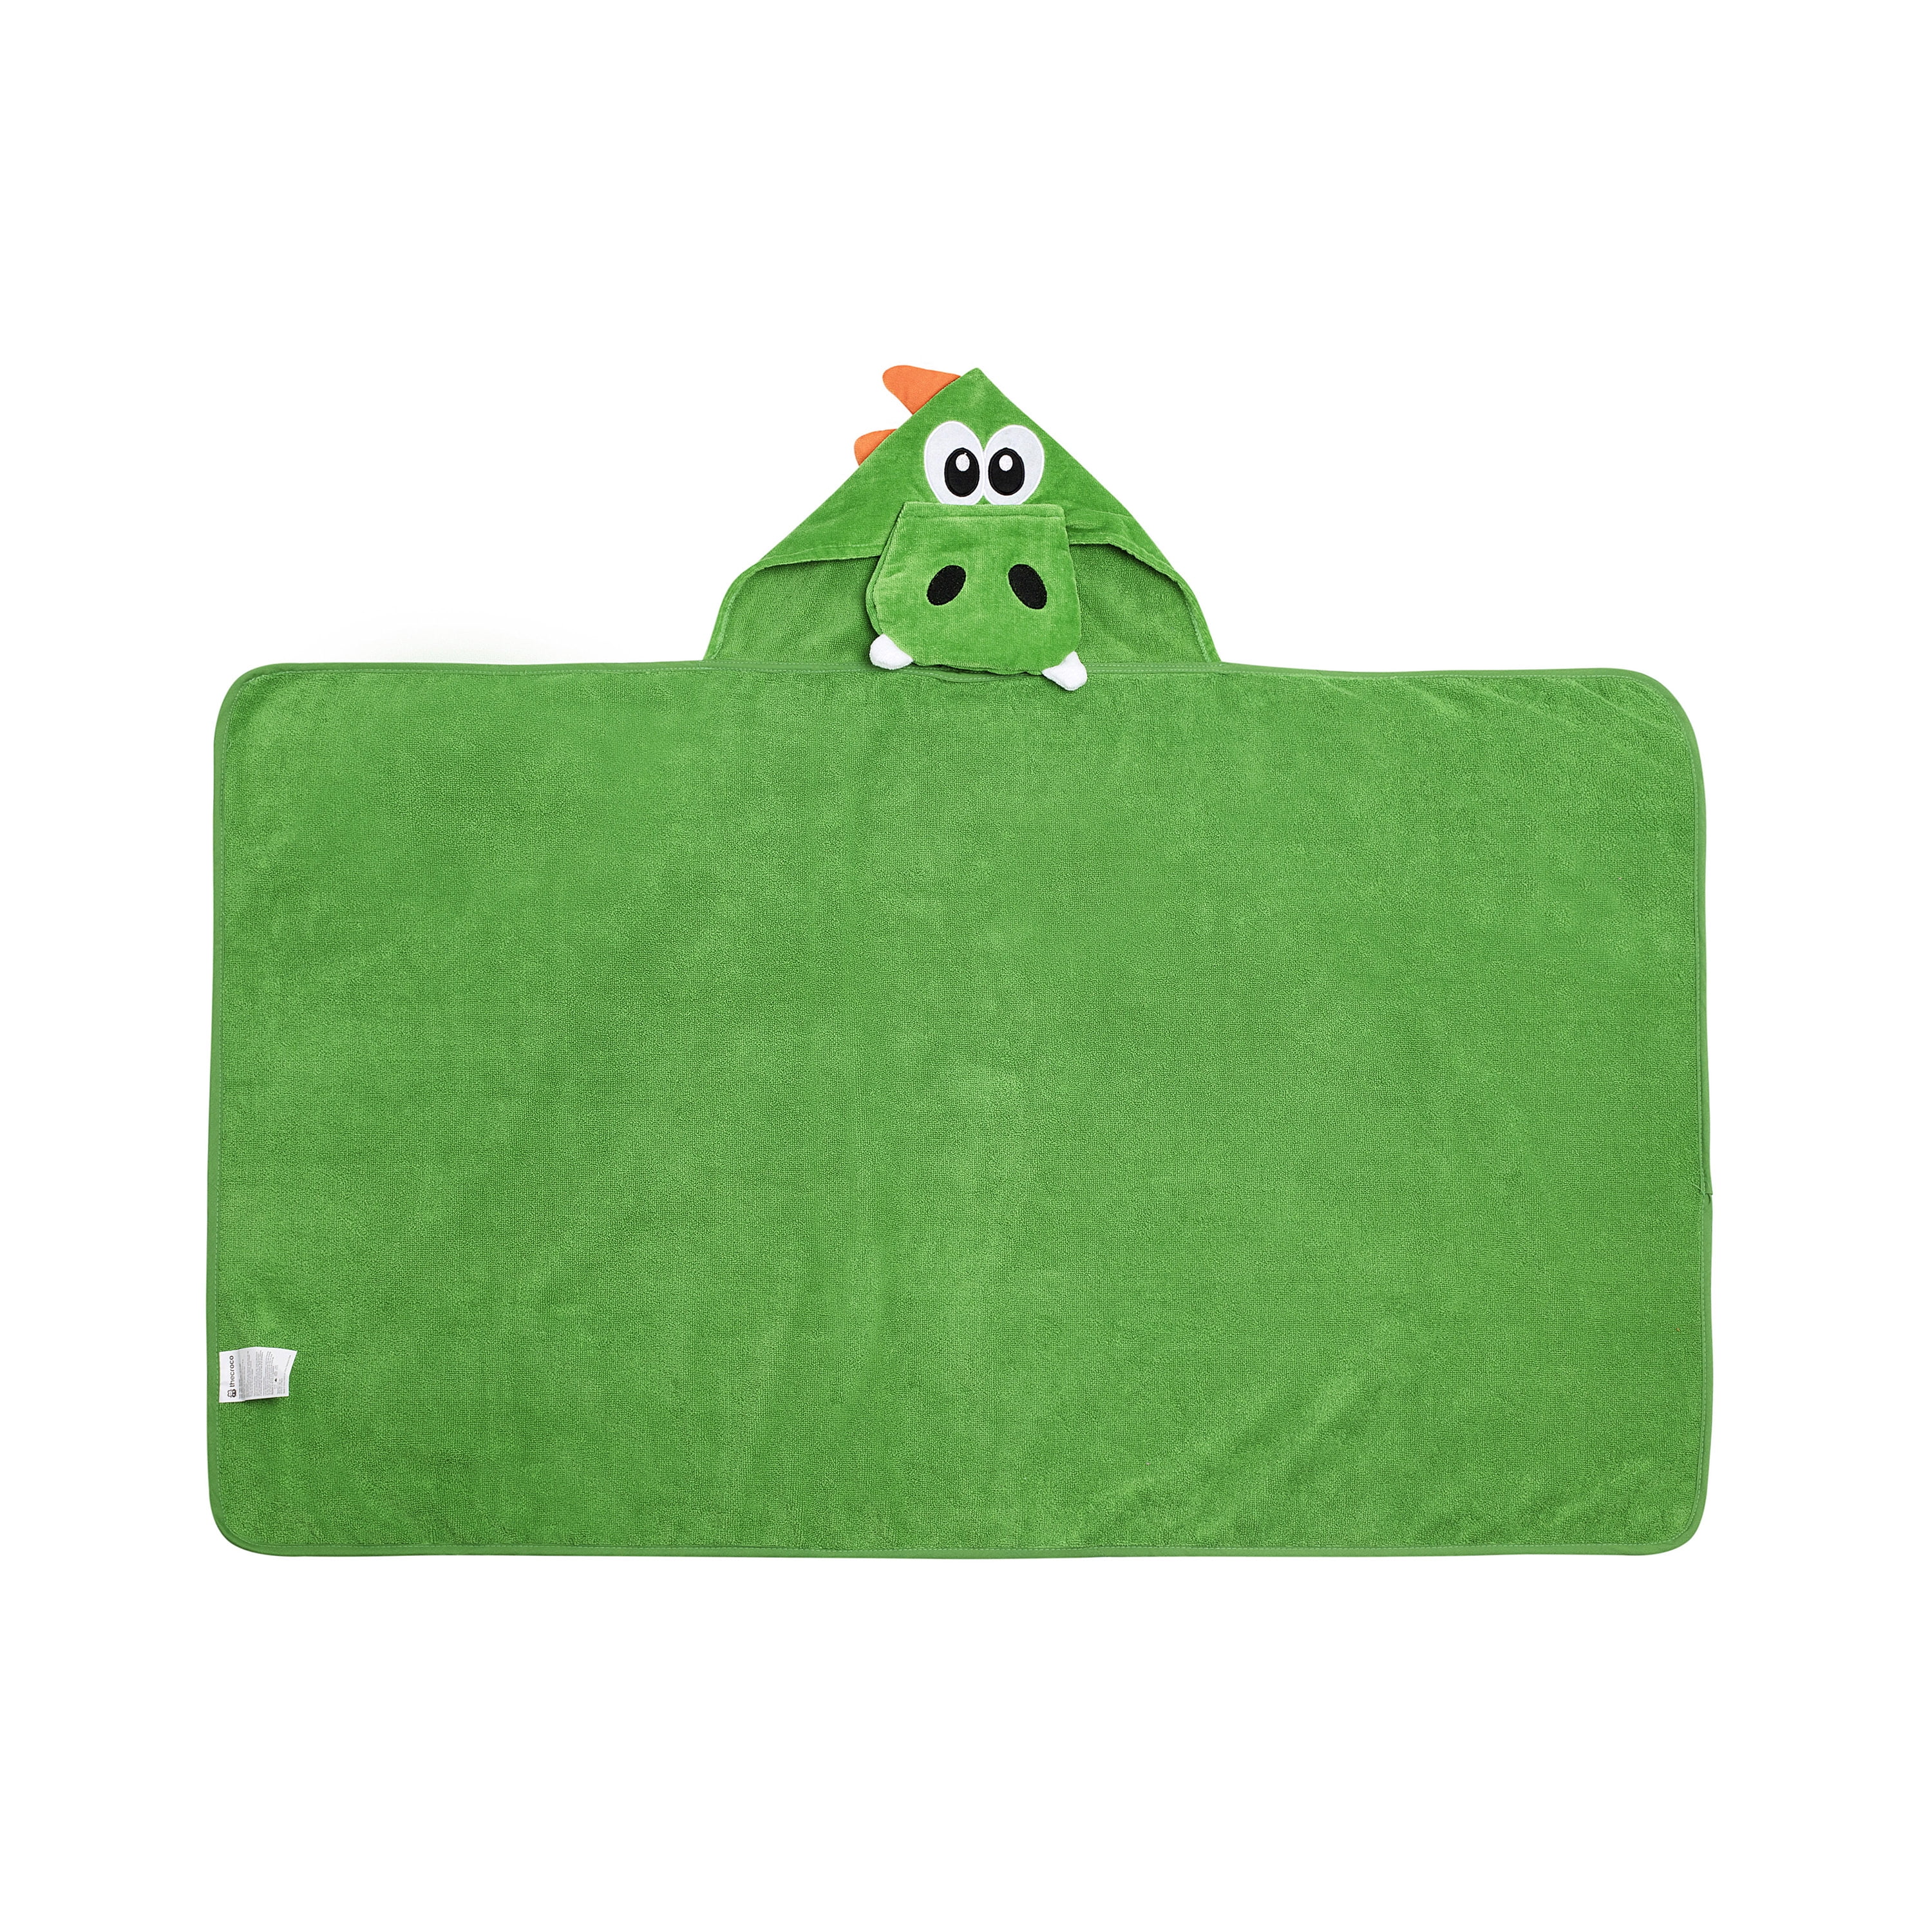 Super Absorbent Thick, TheCroco Premium Hooded Towel: Ultra Soft 100% Cotton 